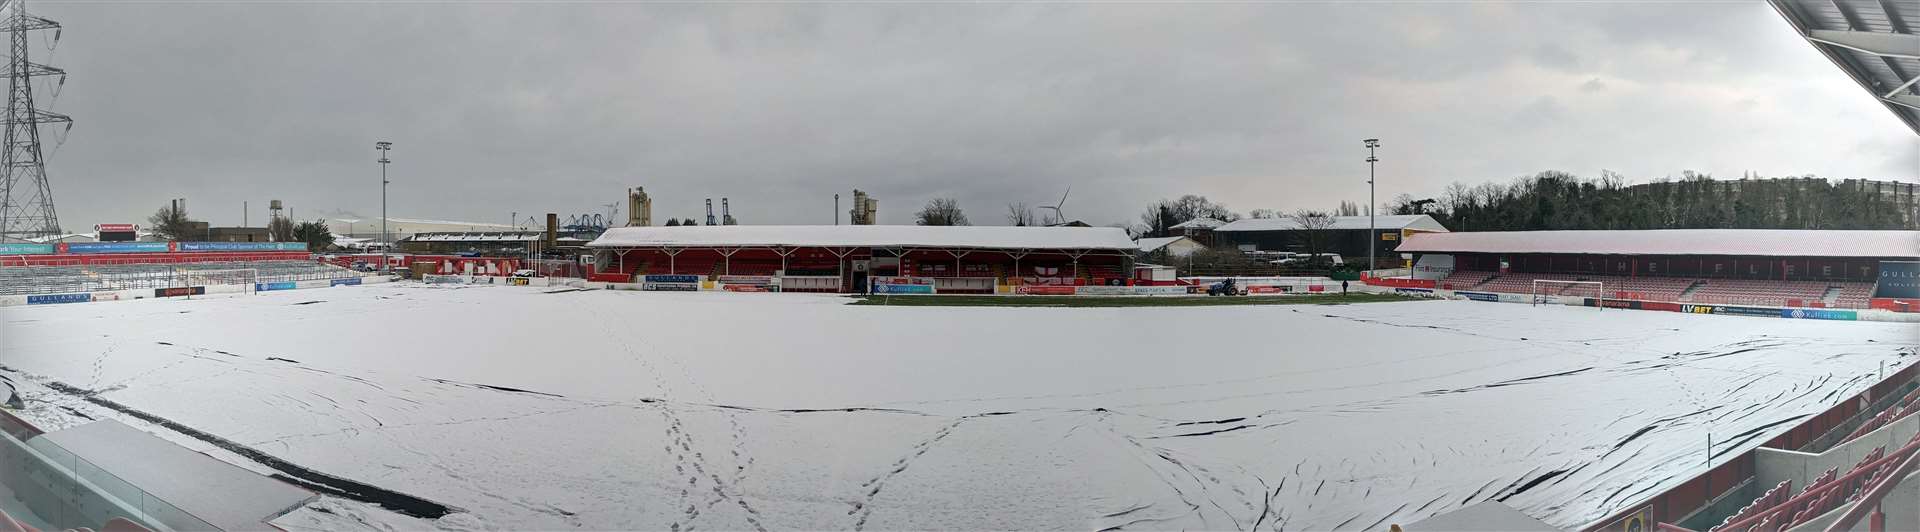 Ebbsfleet United's pitch before it was cleared to host Hampton & Richmond Picture: Ed Miller/EUFC